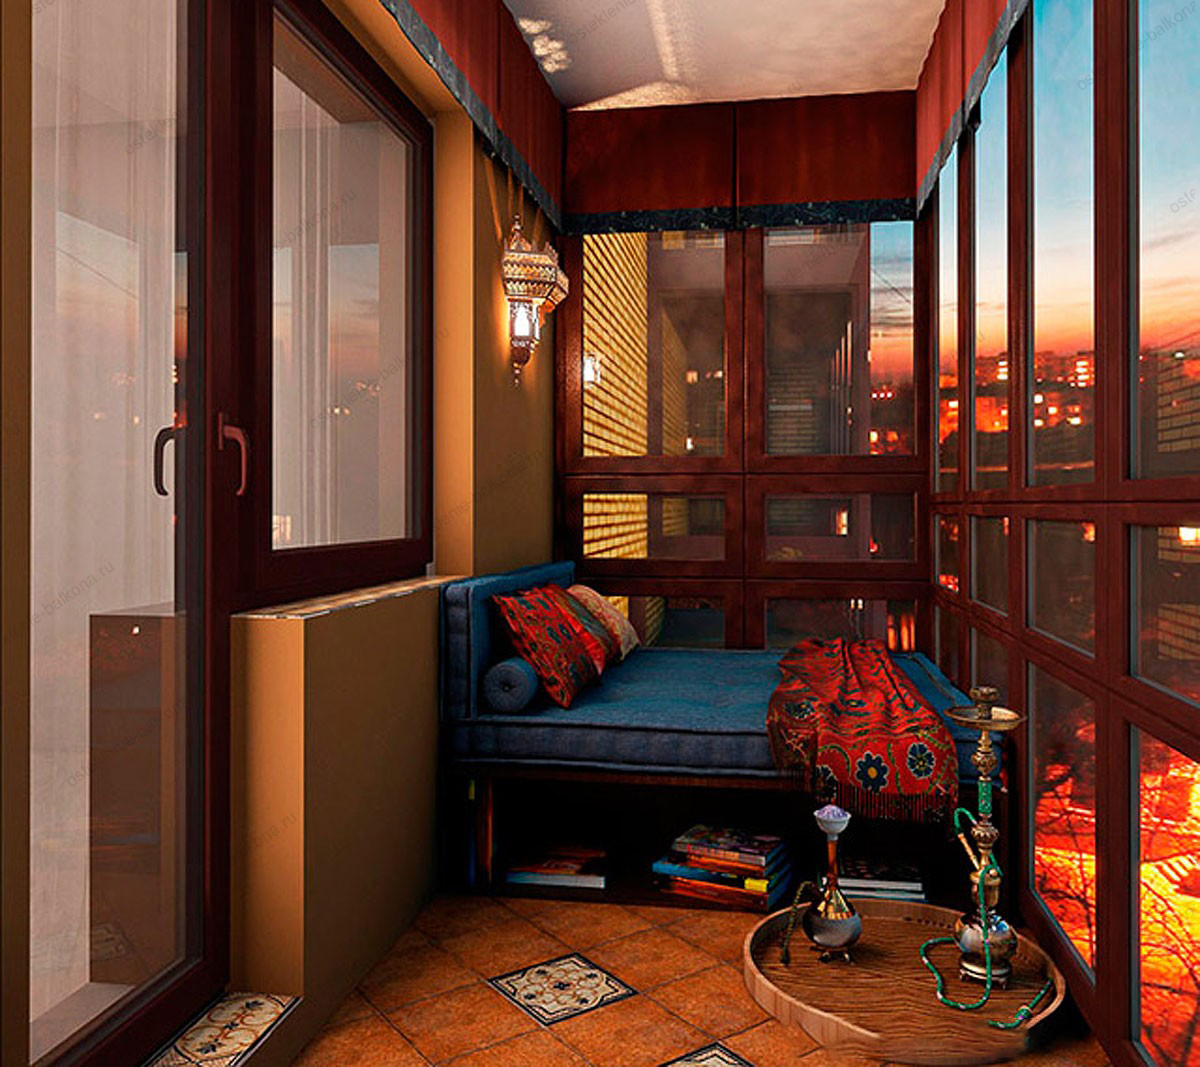 Interior of a living balcony with oriental elements